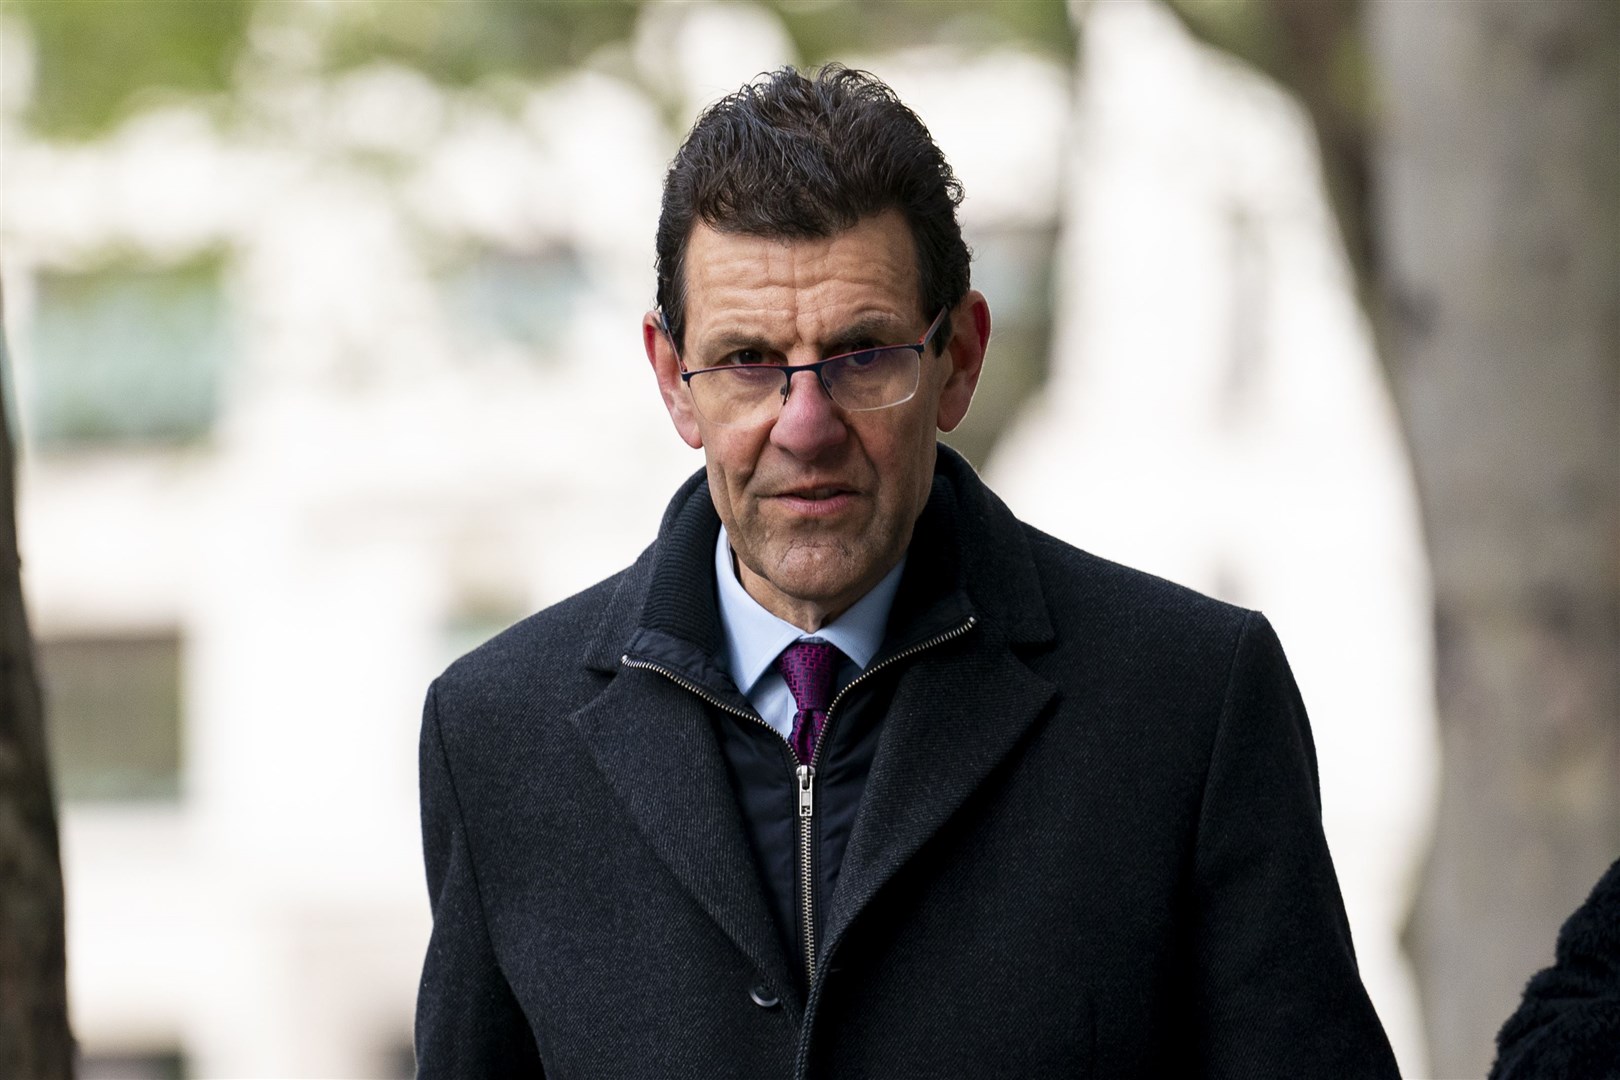 Chris Aujard, former general counsel of Post Office Ltd, apologised to subpostmasters and their families before giving evidence to the Horizon IT inquiry (Jordan Pettitt/PA)